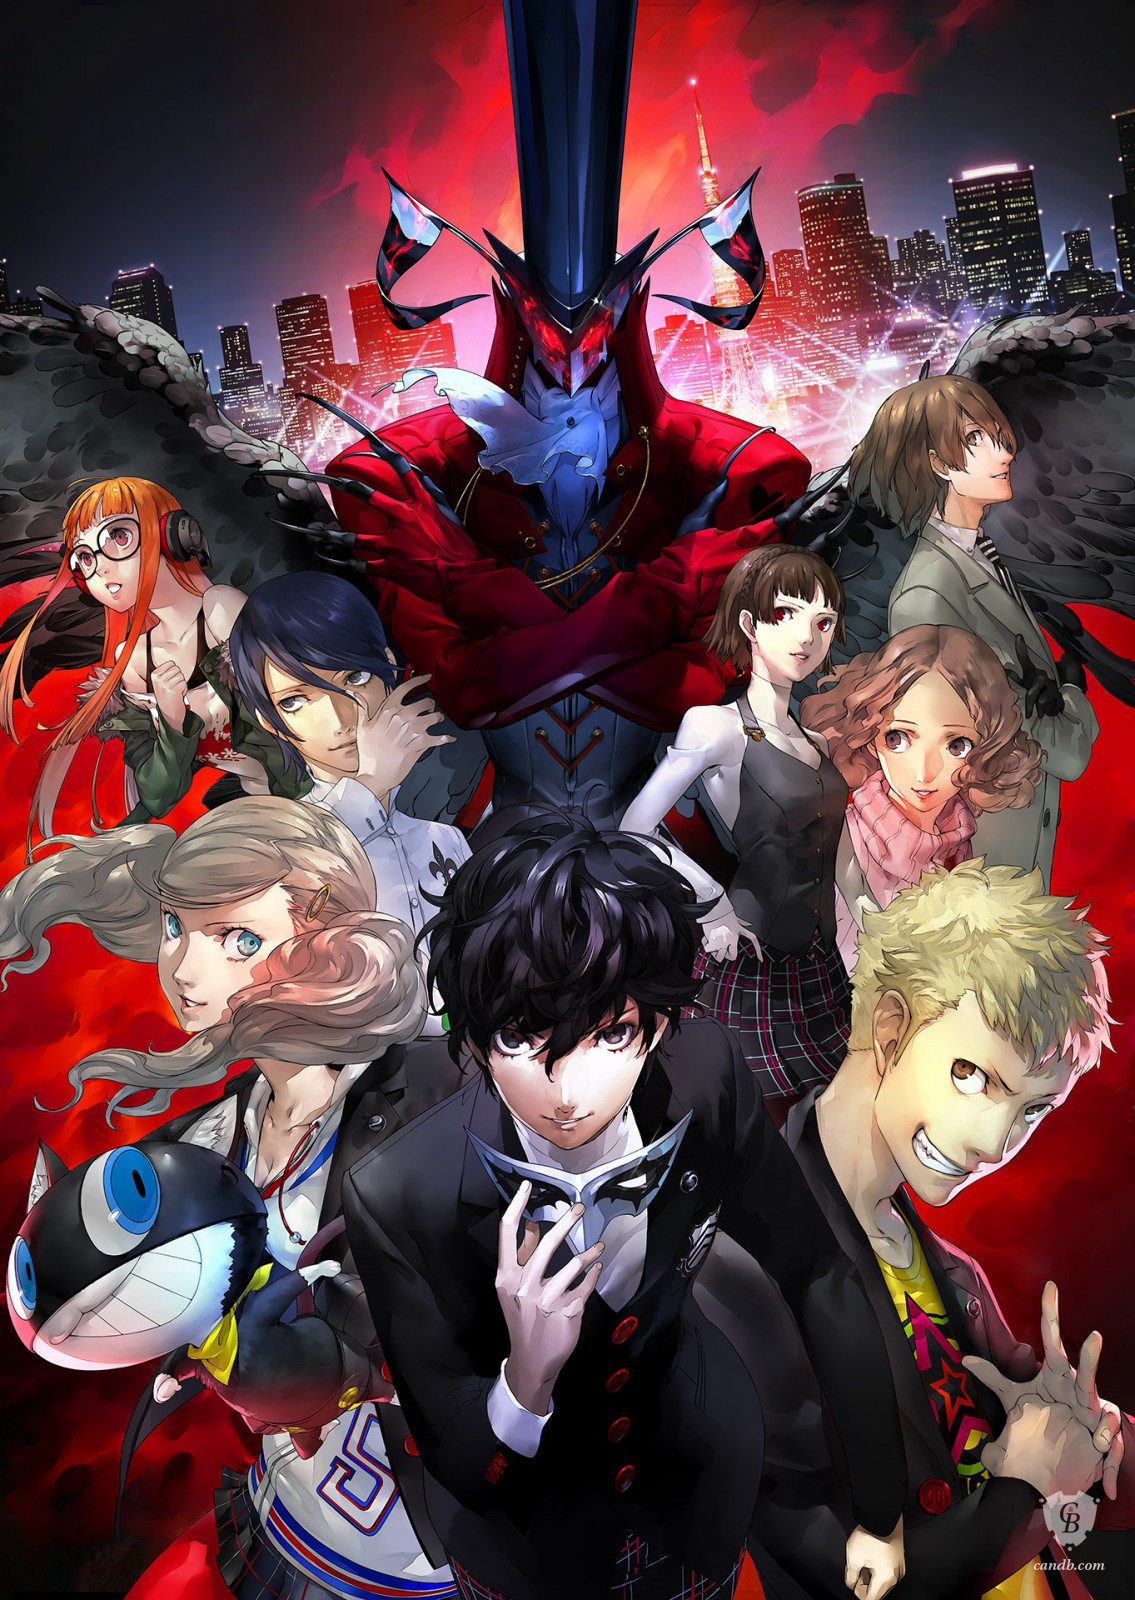 Artwork Take Your Heart - Persona 5 Atlus